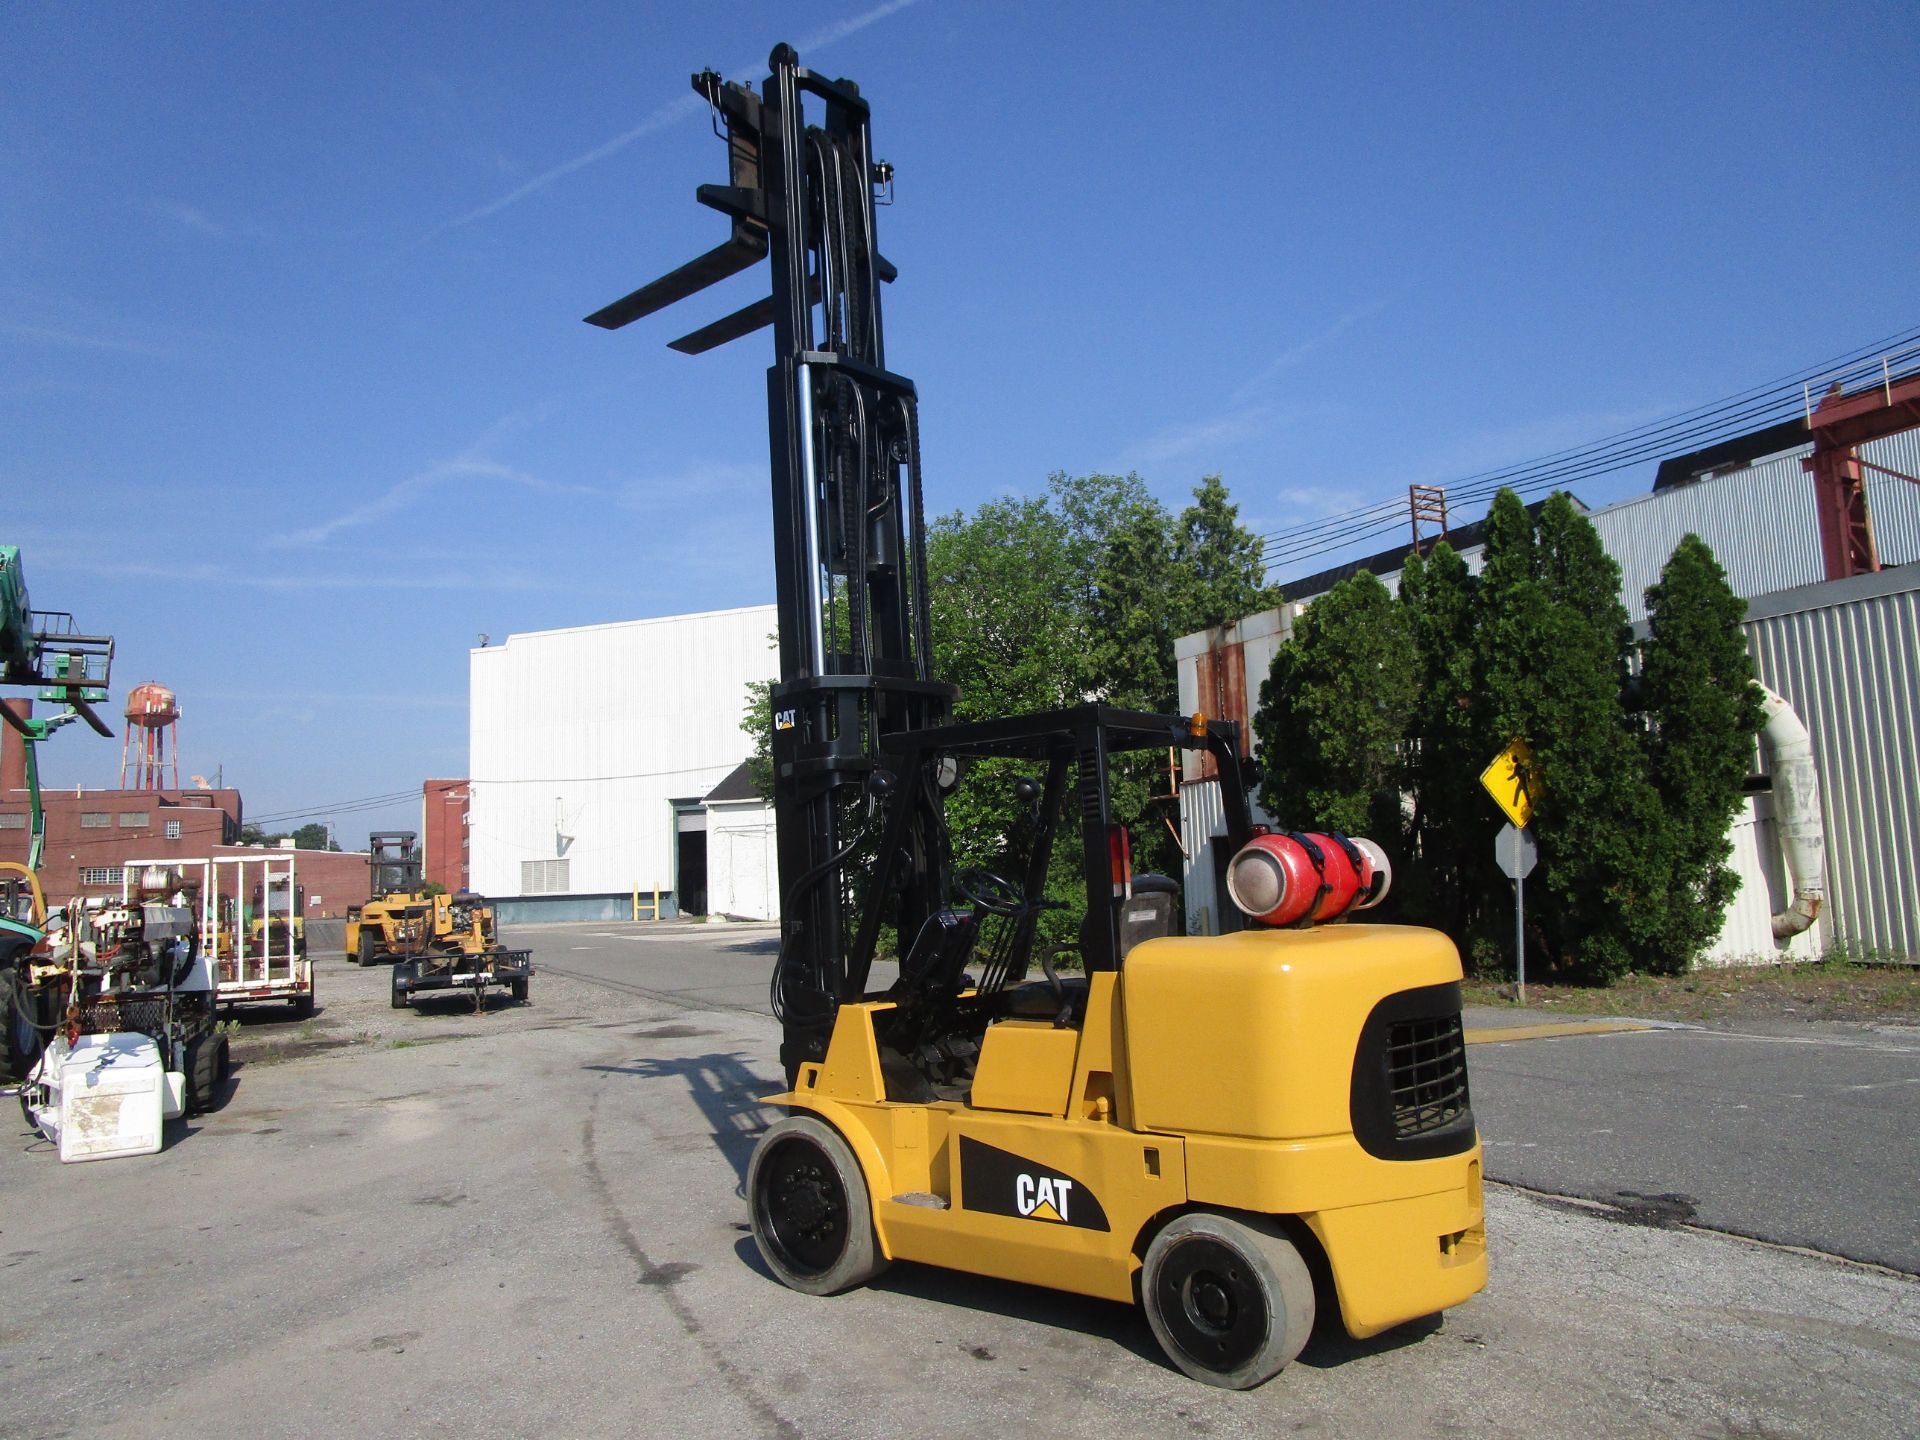 Caterpillar GC60K 13,000lb Forklift - Located in Lester, PA - Image 5 of 10